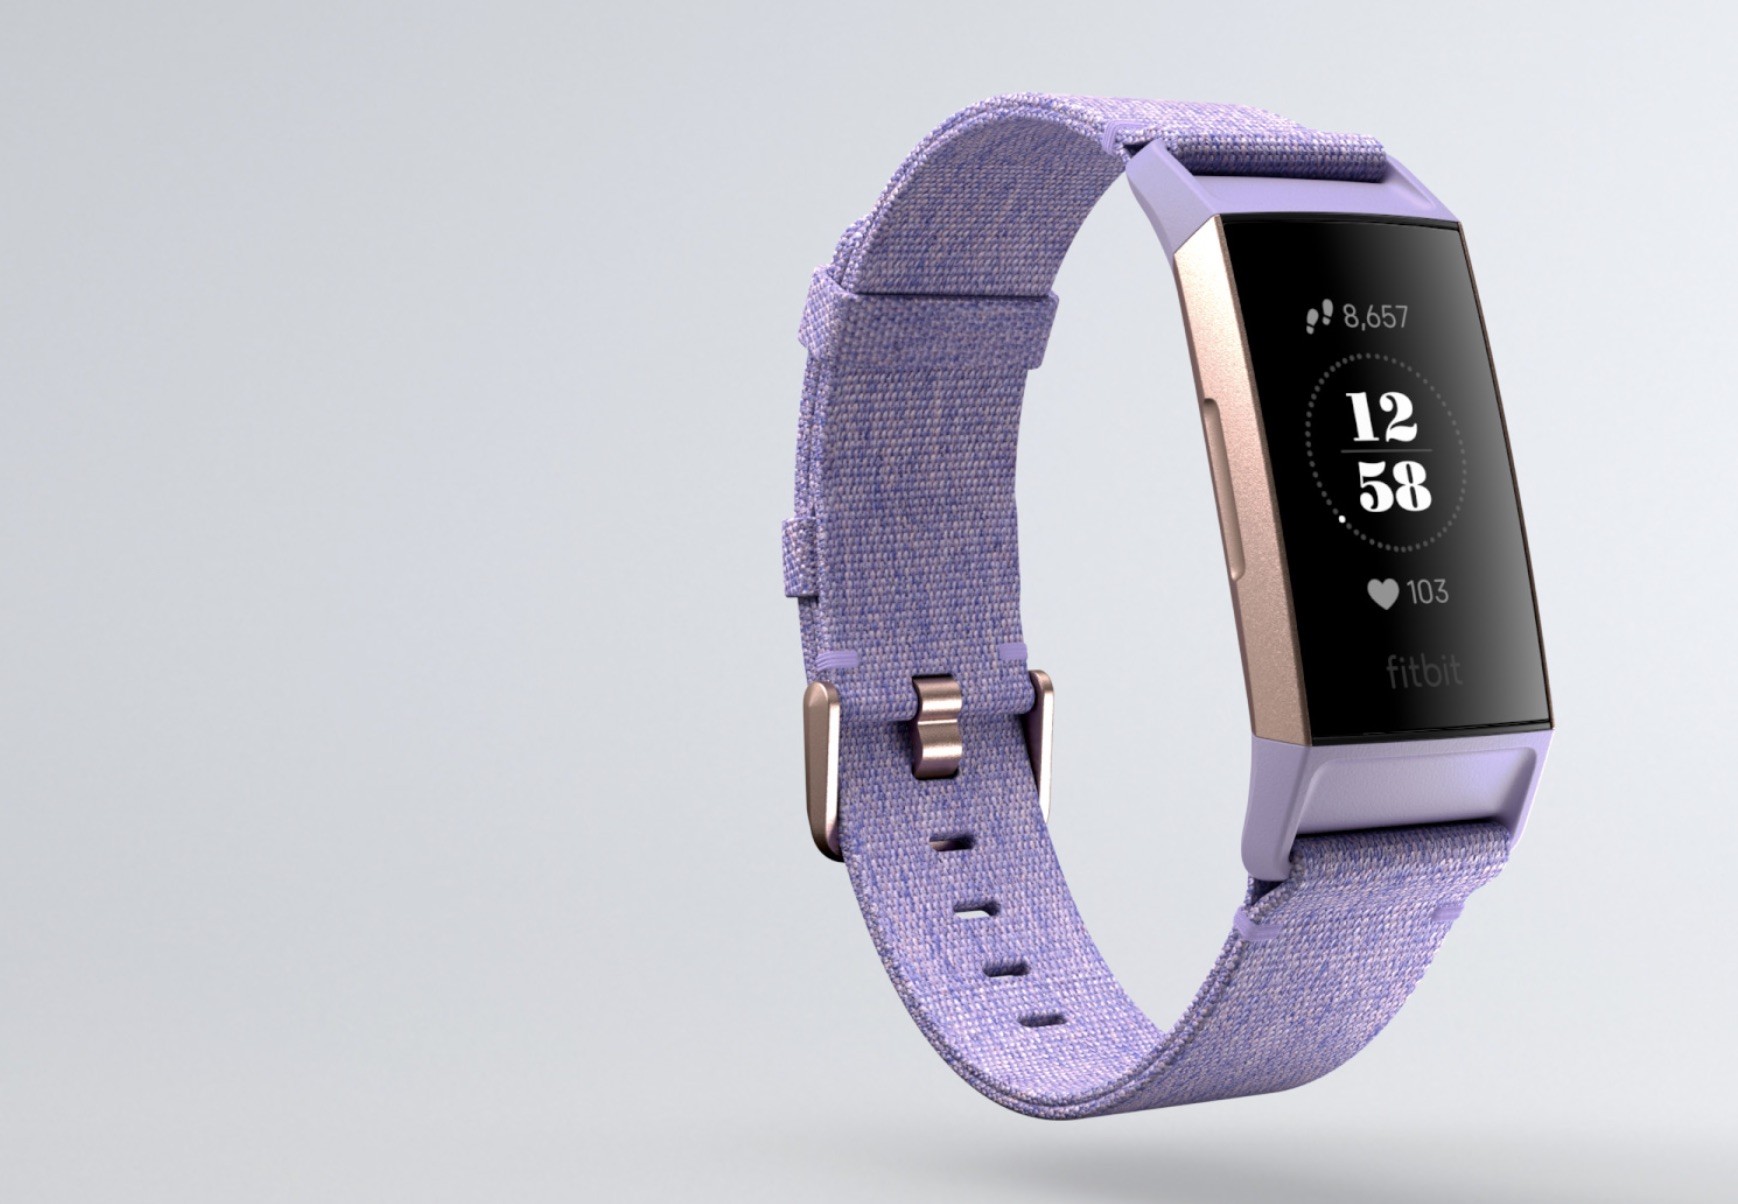 Fitbit Charge 3 Unveiled as Fitbit's Most Advanced Health & Fitness